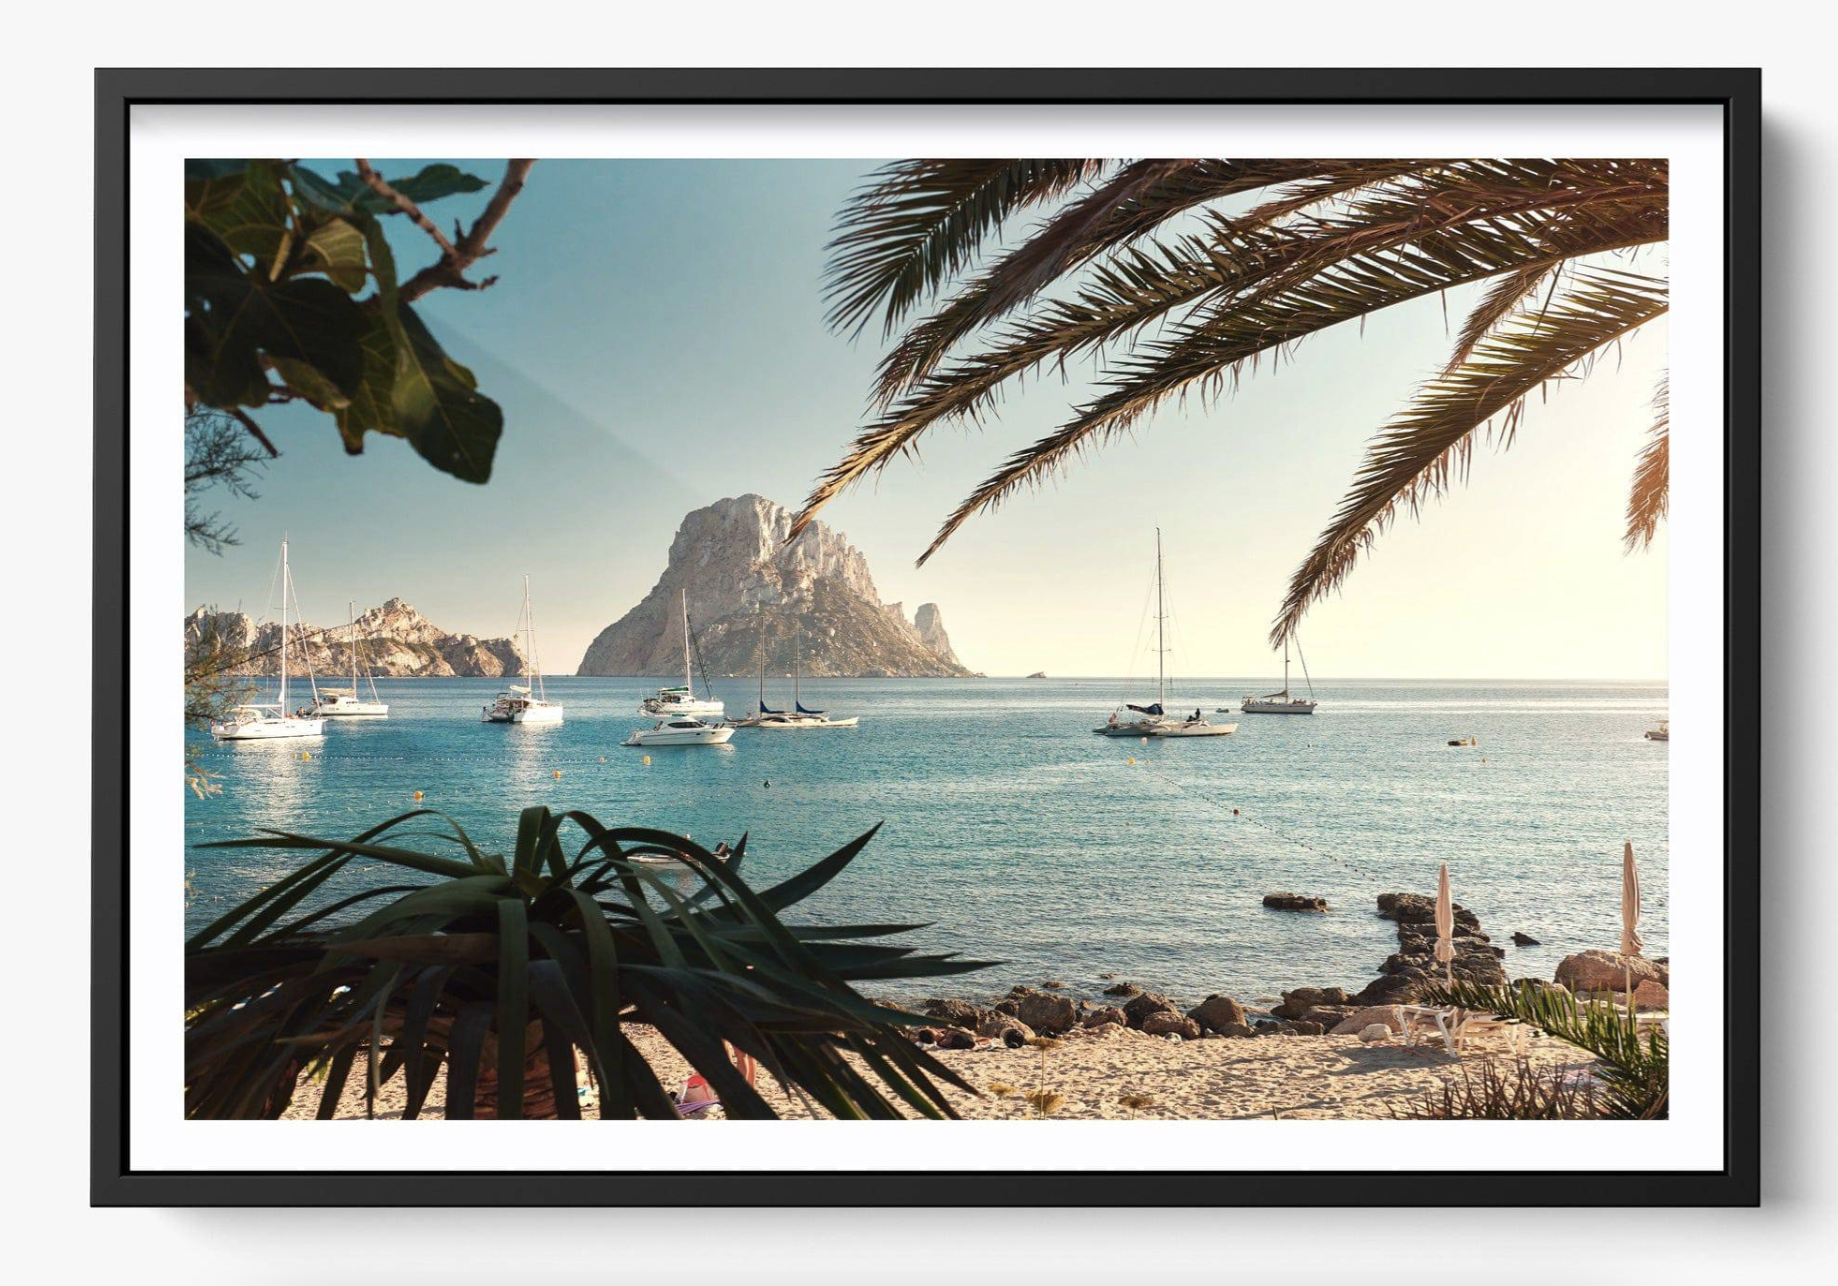 Scenic view of a calm bay with yachts and a prominent rocky outcrop in the distance, framed by palm leaves